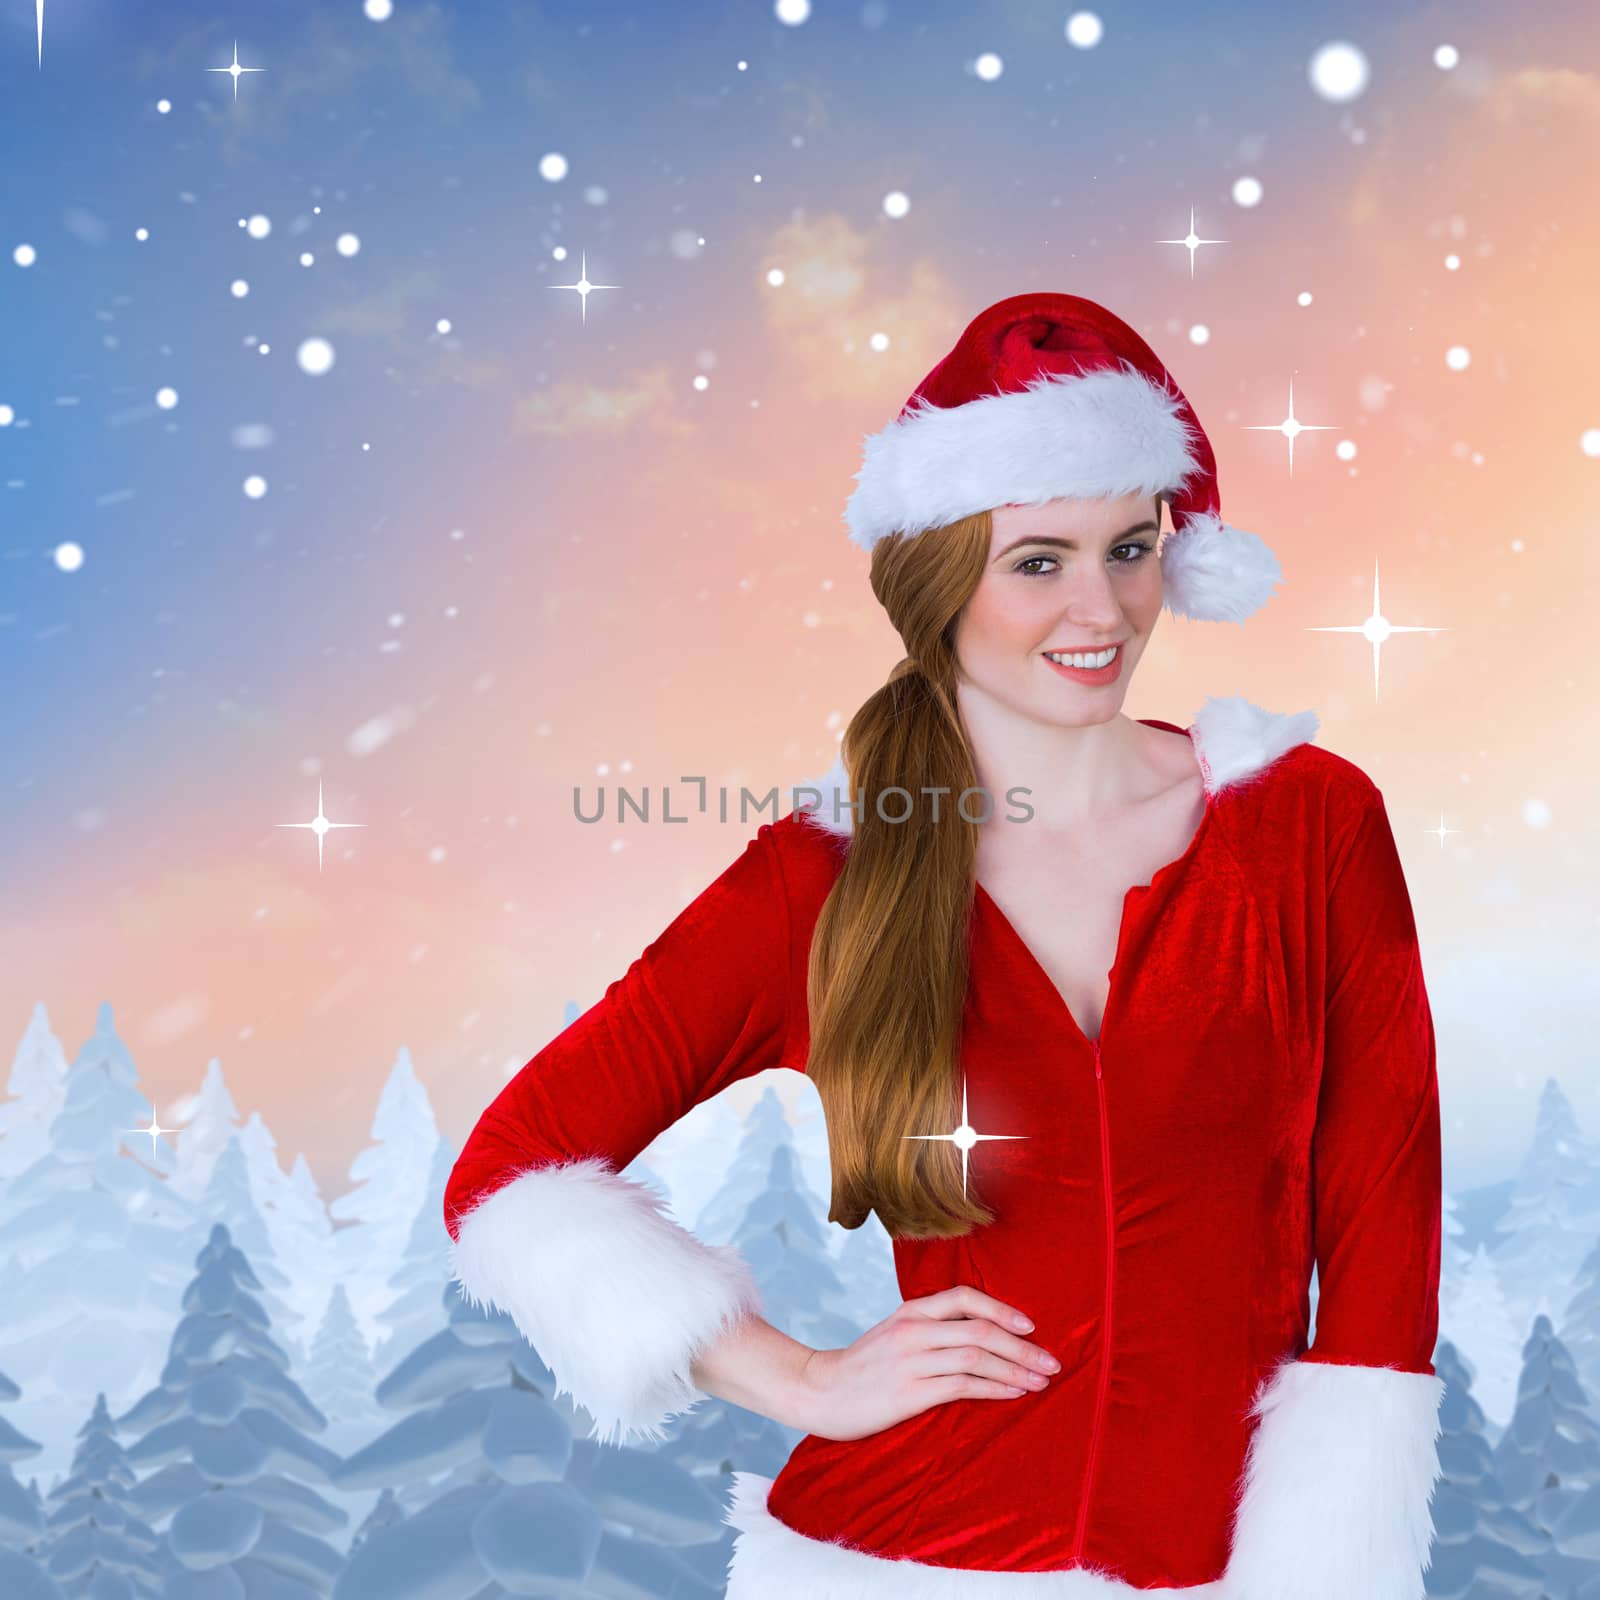 Pretty girl in santa costume smiling at camera against snow falling on fir tree forest